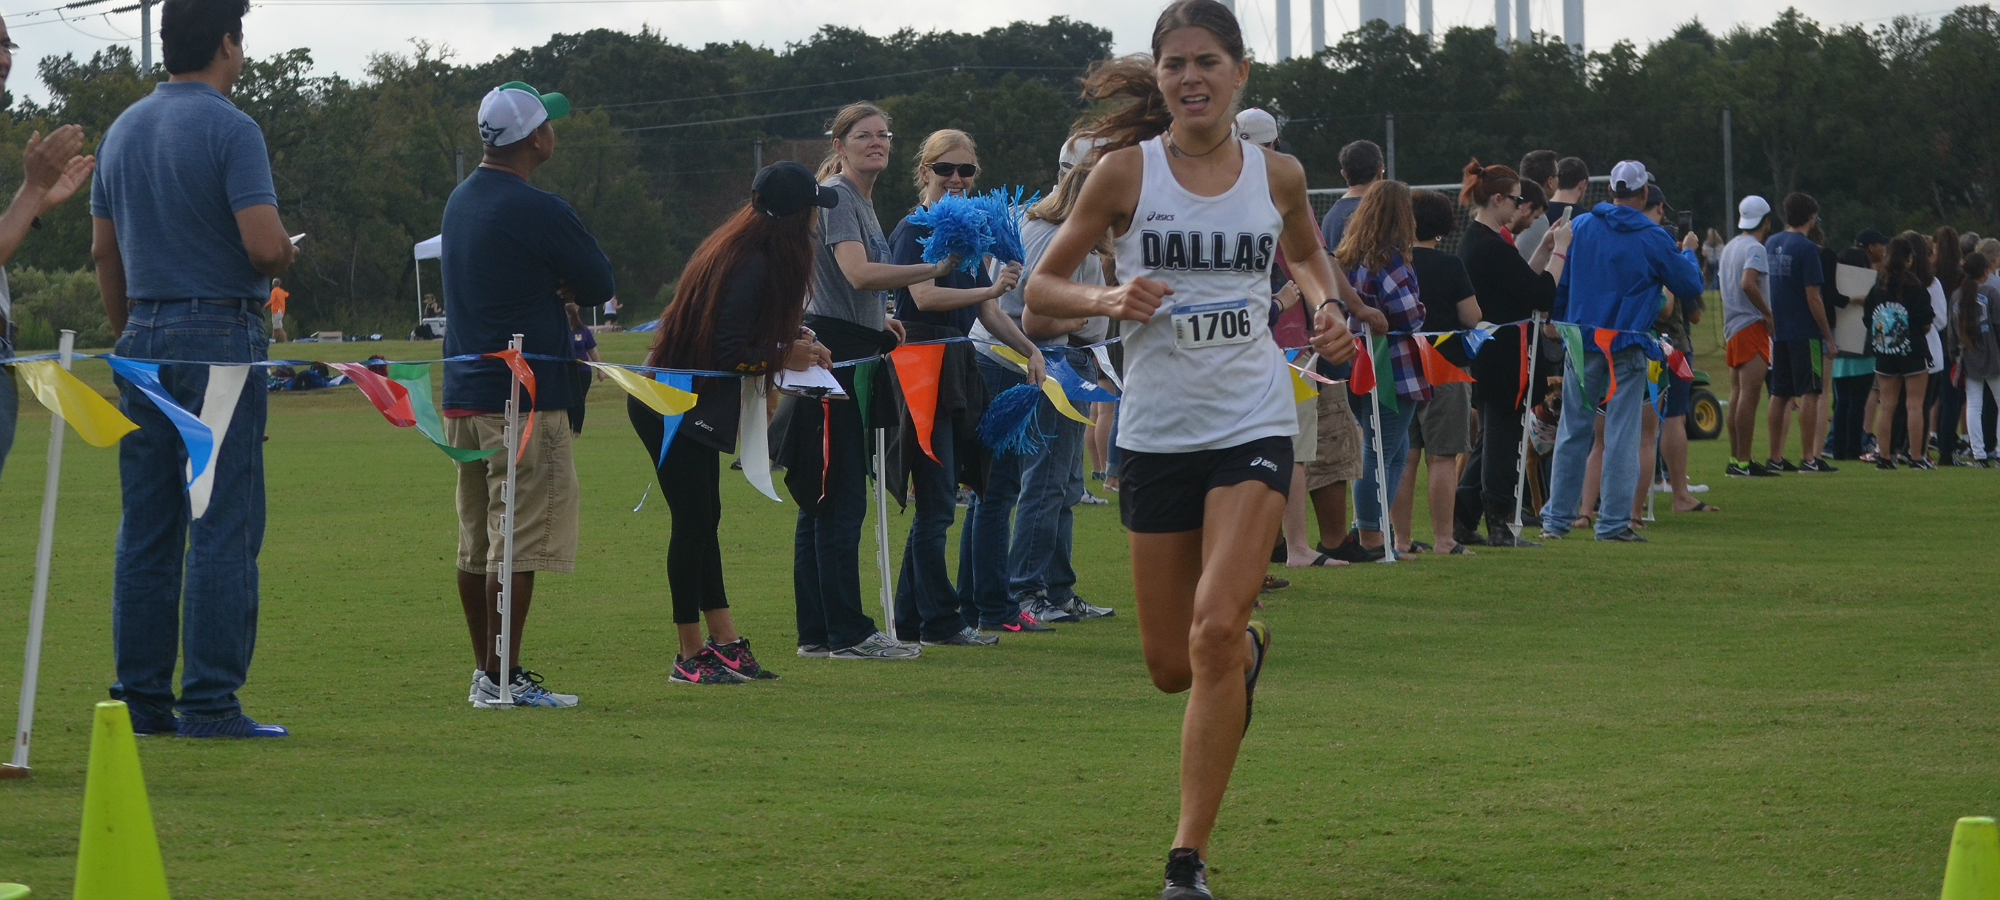 Moore takes 9th; Women's Cross Country 4th Overall in Home Meet